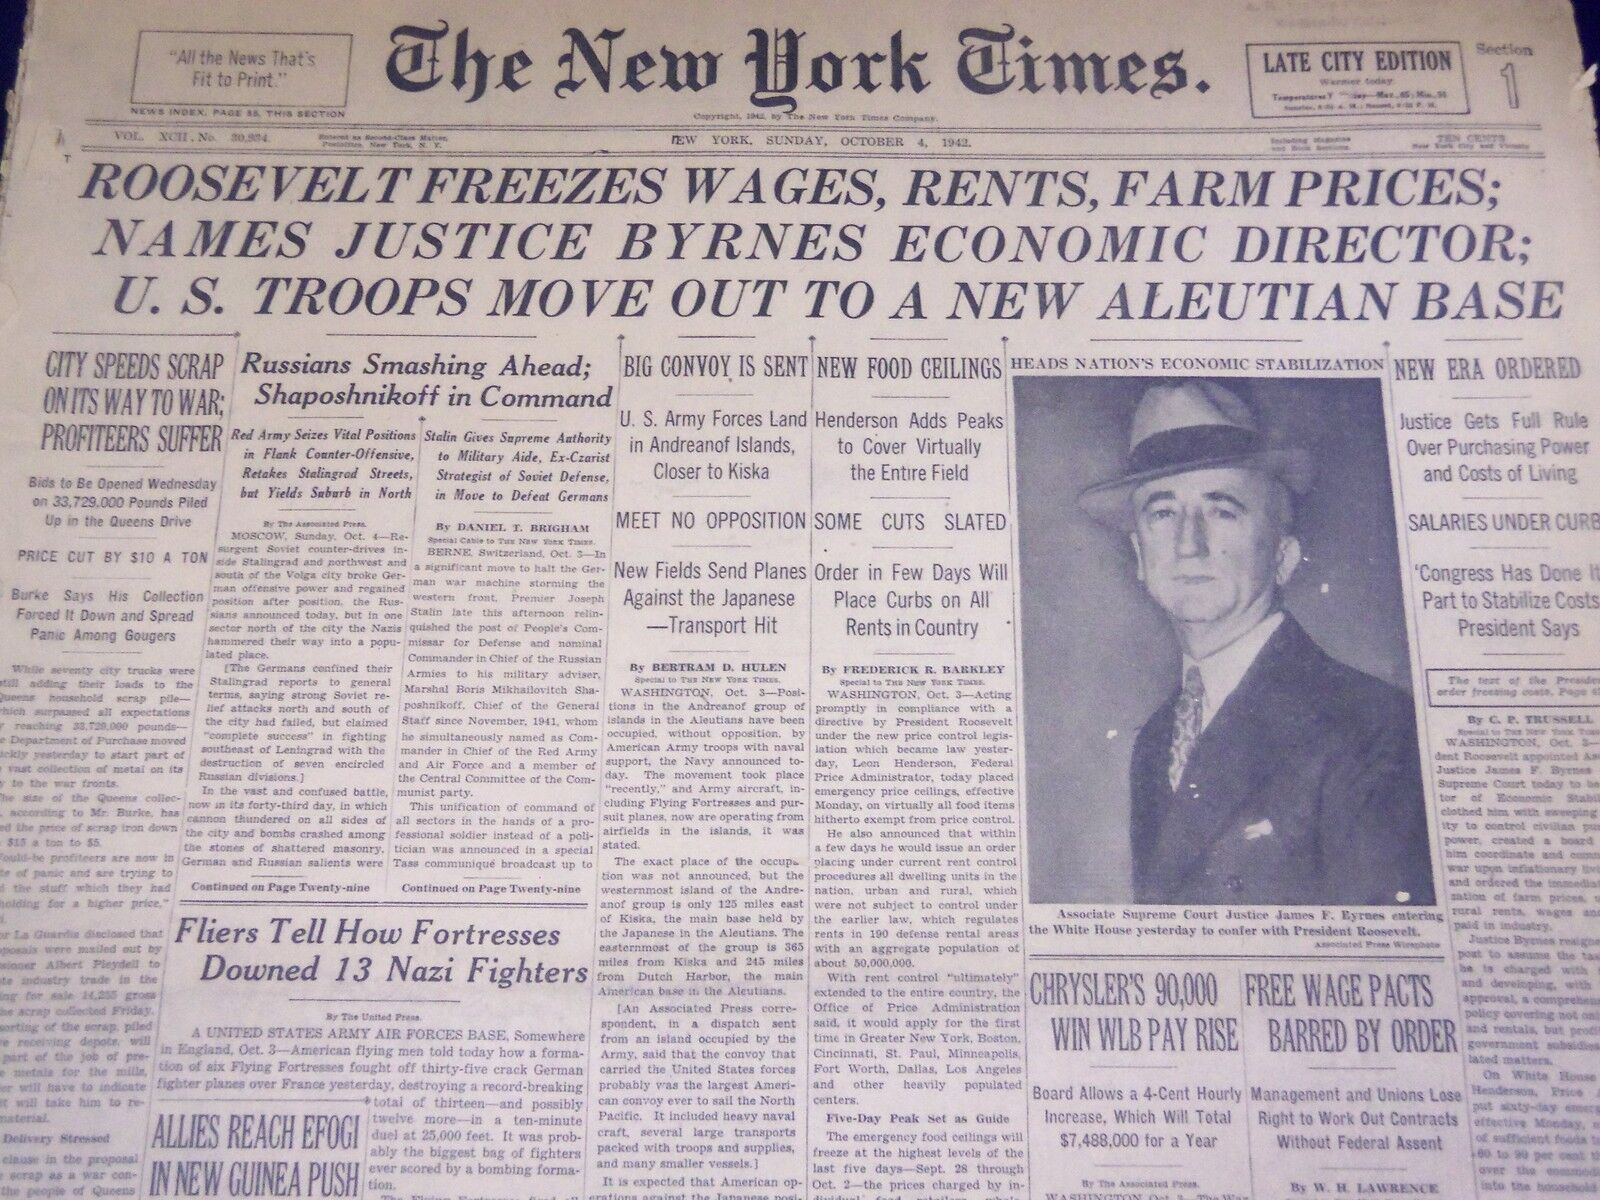 1942 OCT 4 NEW YORK TIMES - ROOSEVELT FREEZES WAGES BYRNES - NT 1144